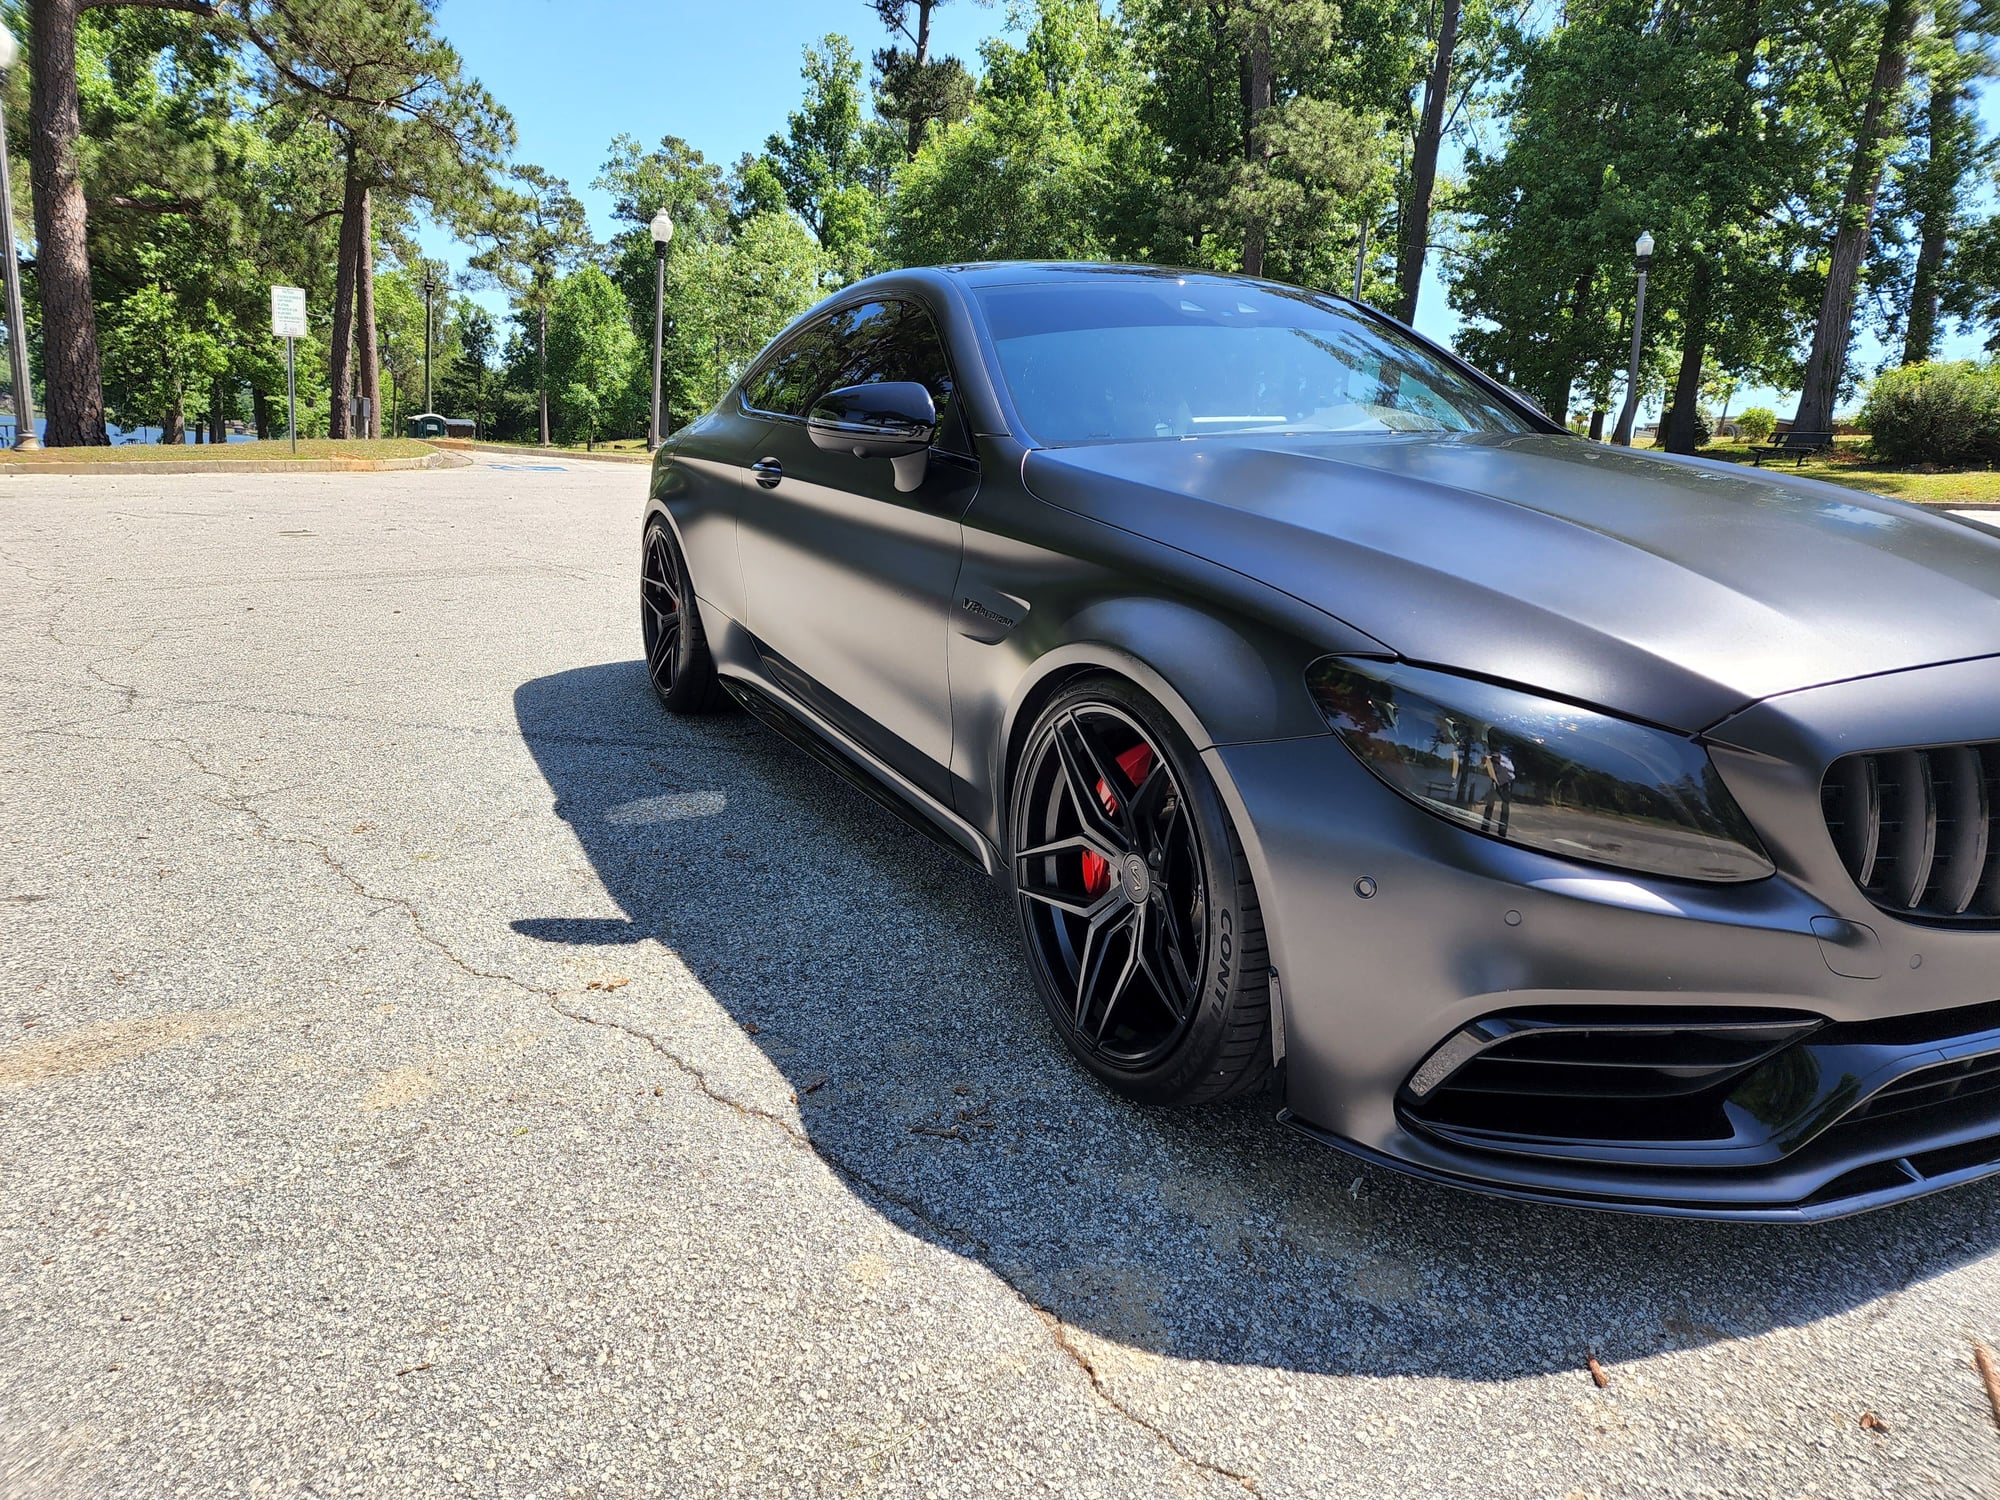 2020 Mercedes-Benz C63 AMG S - Reducing my debt and focusing more on my business - Used - VIN WDDWJ8HB0LF945677 - 38,000 Miles - 8 cyl - 2WD - Automatic - Coupe - Black - Grovetown, GA 30813, United States